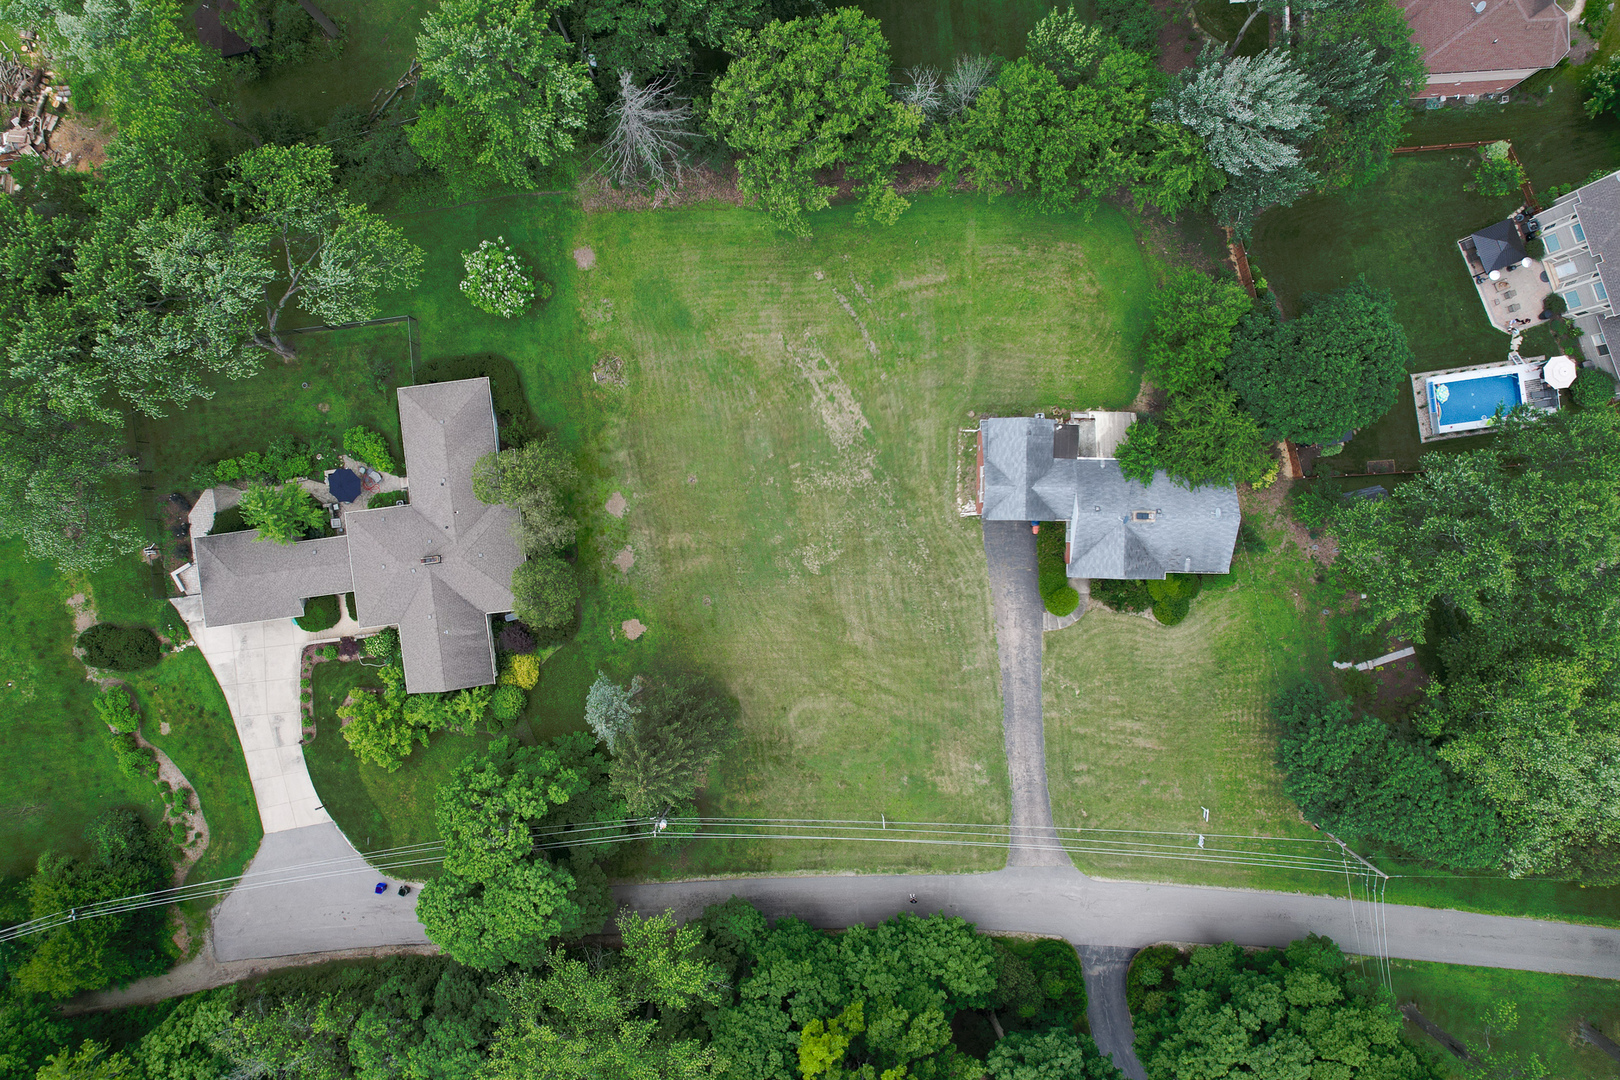 an aerial view of residential house with outdoor space and trees around